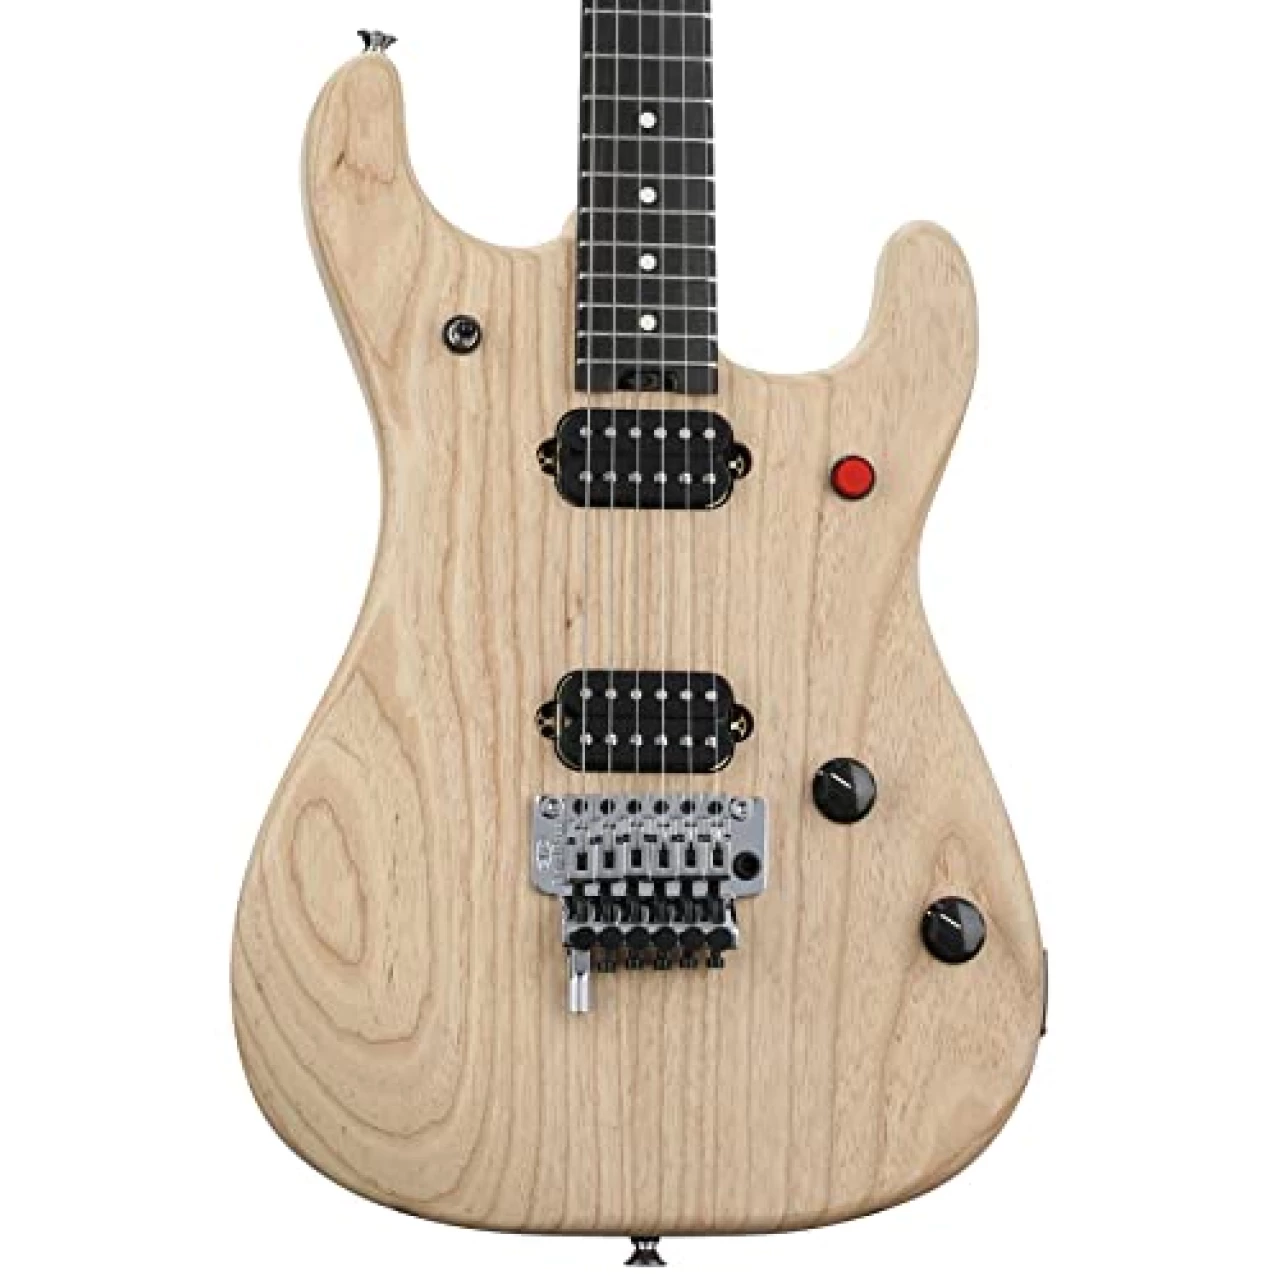 EVH Limited-edition 5150 Deluxe Ash Electric Guitar - Natural